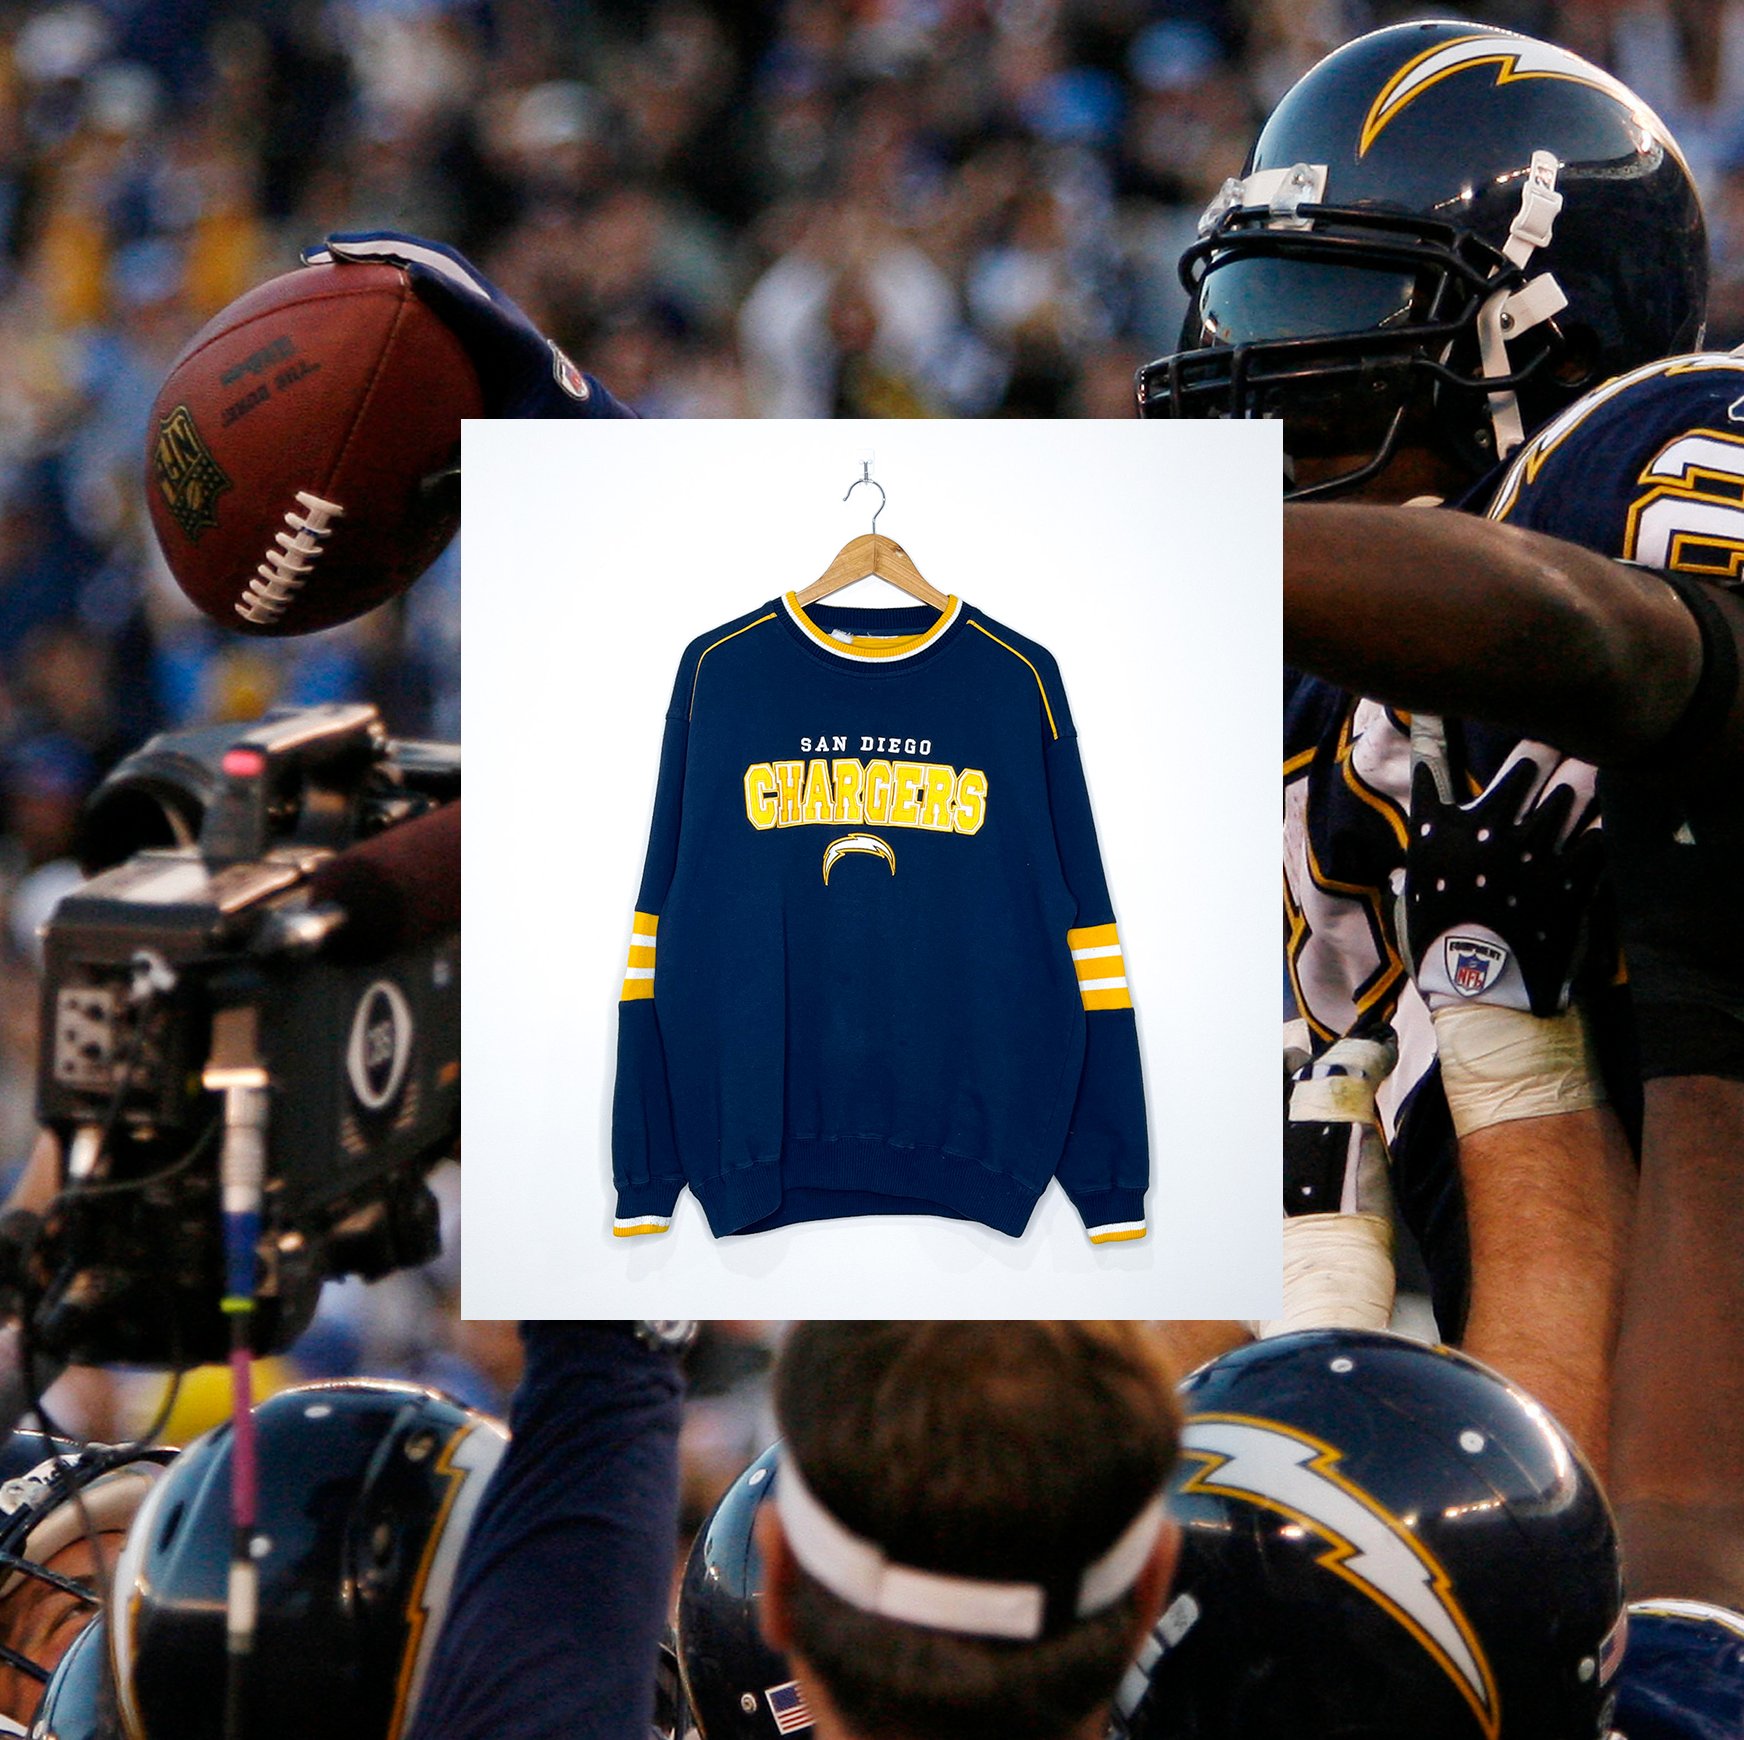 SAN DIEGO CHARGERS EMBROIDERED VINTAGE CREWNECK